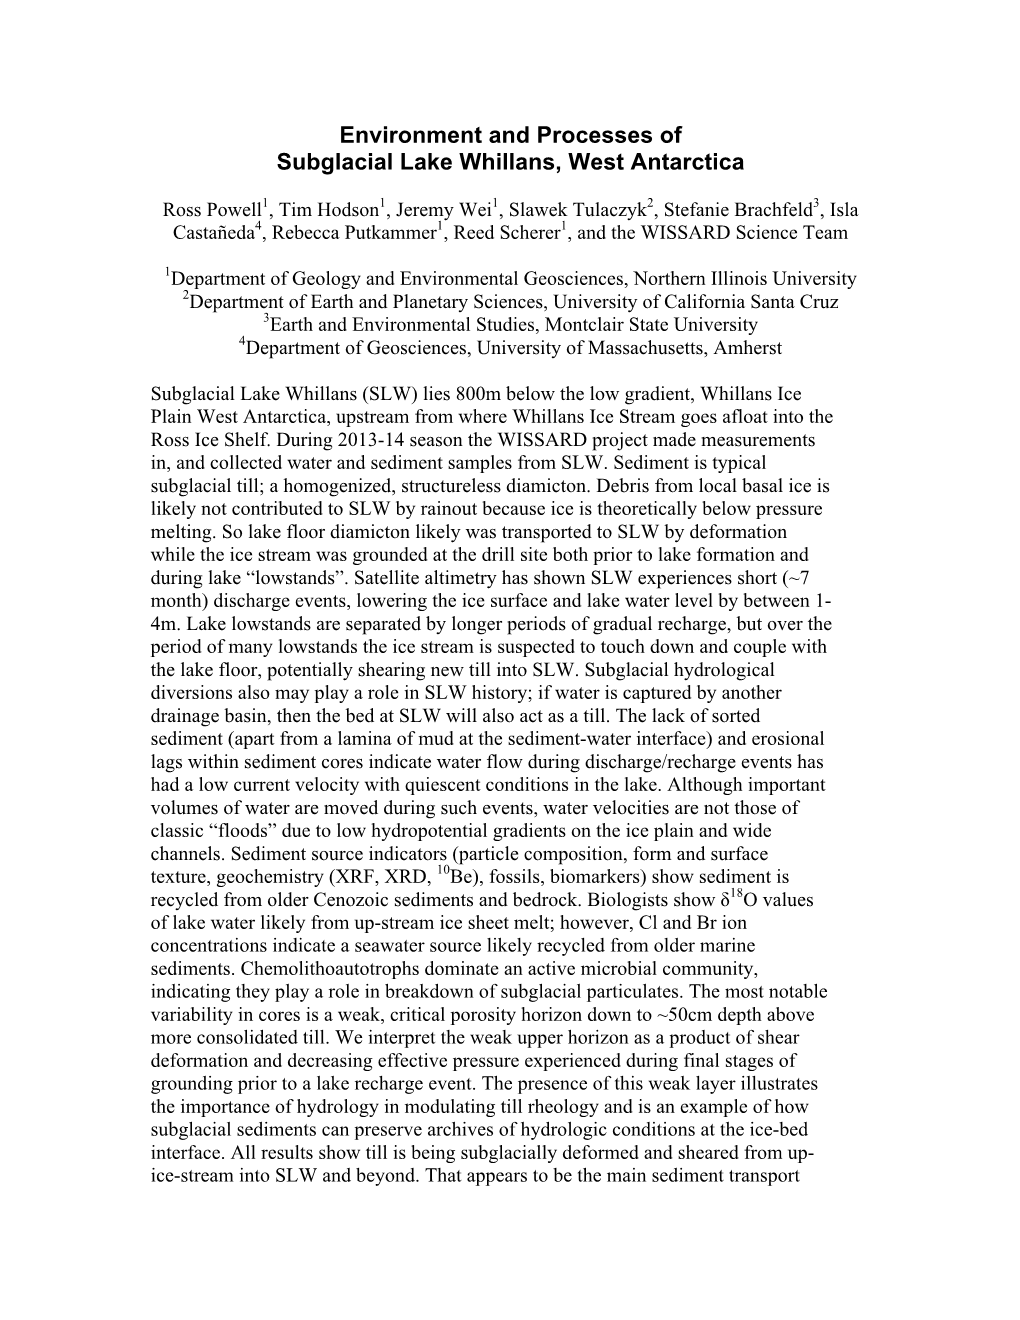 Environment and Processes of Subglacial Lake Whillans, West Antarctica